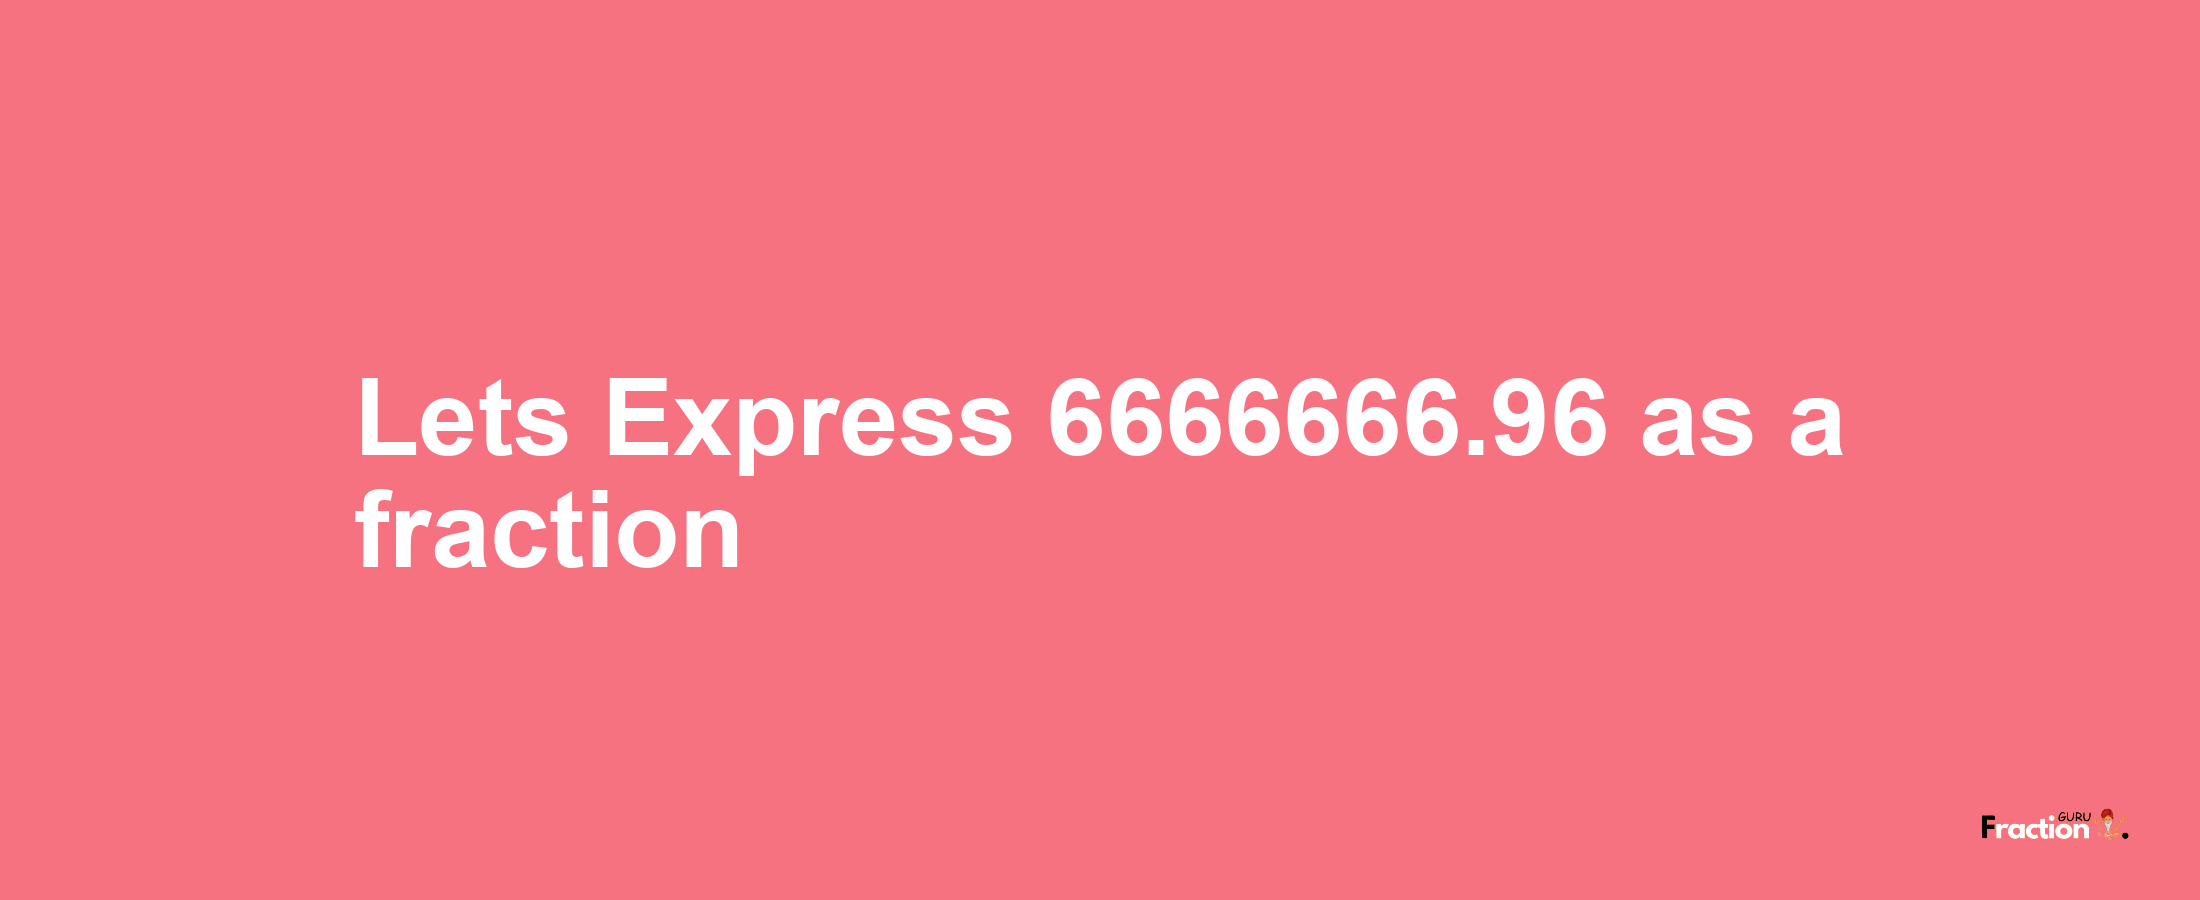 Lets Express 6666666.96 as afraction